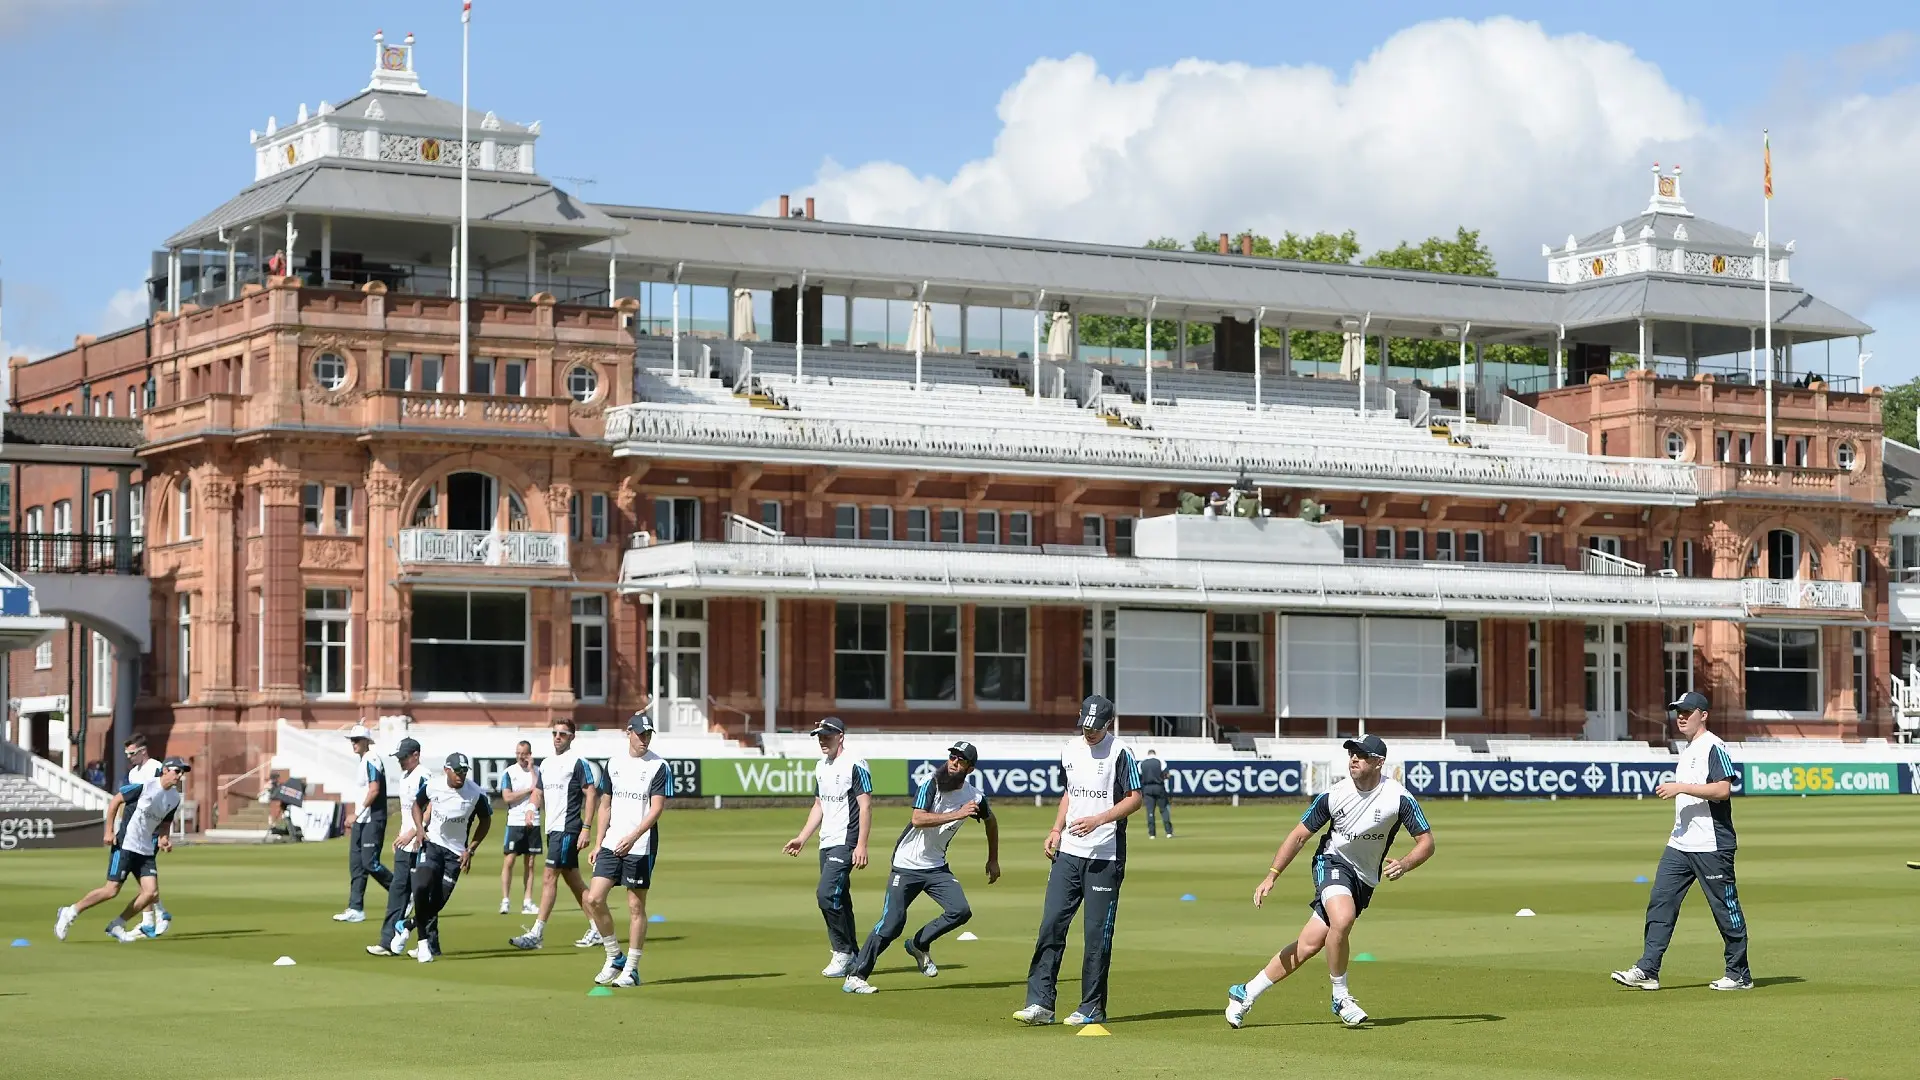 Lord's, one of the most famous sporting venues in london